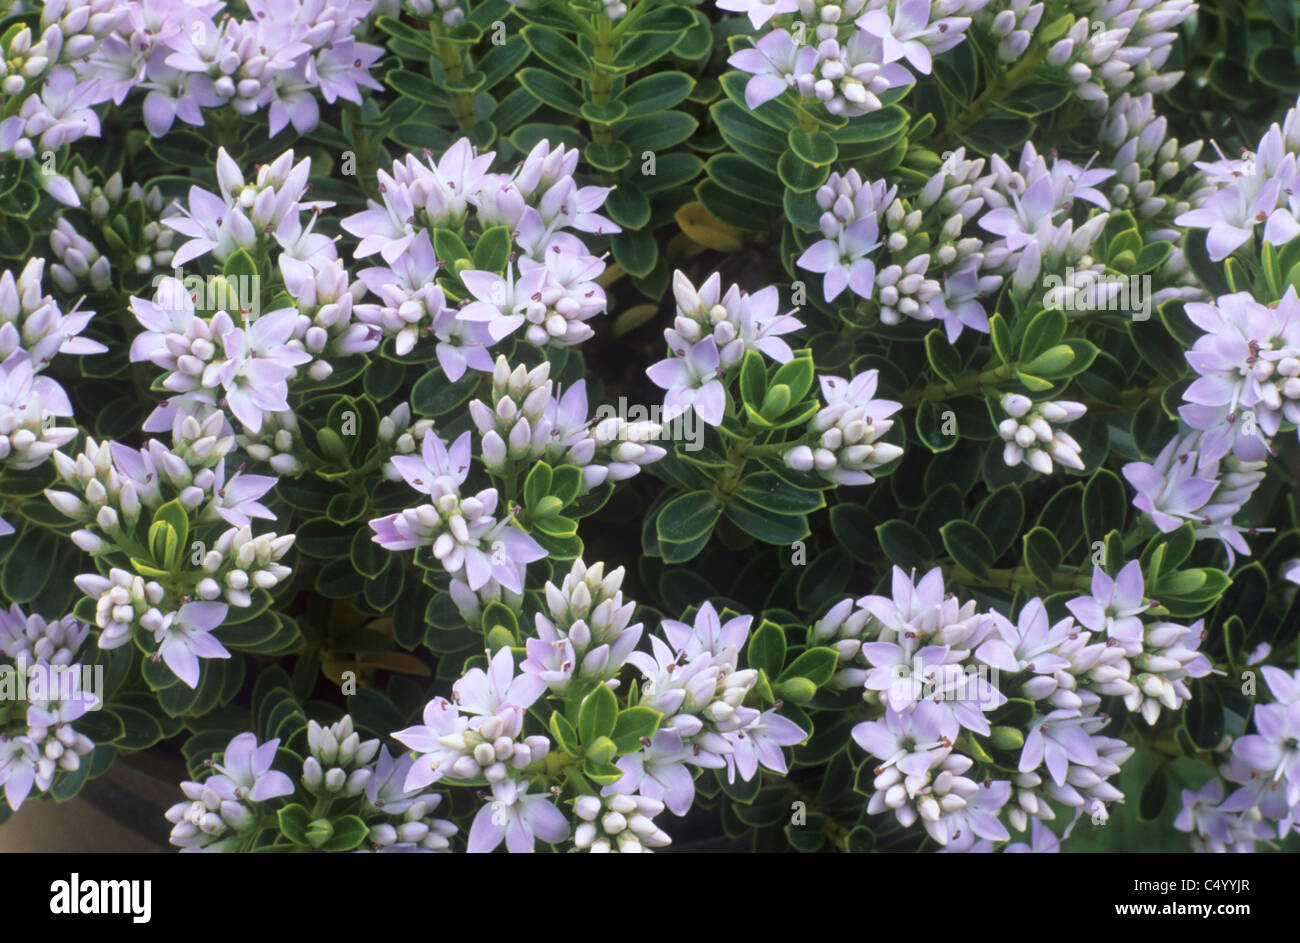 Hebe vernicosa pale lilac flower flowers Hebes garden plant plants Stock Photo